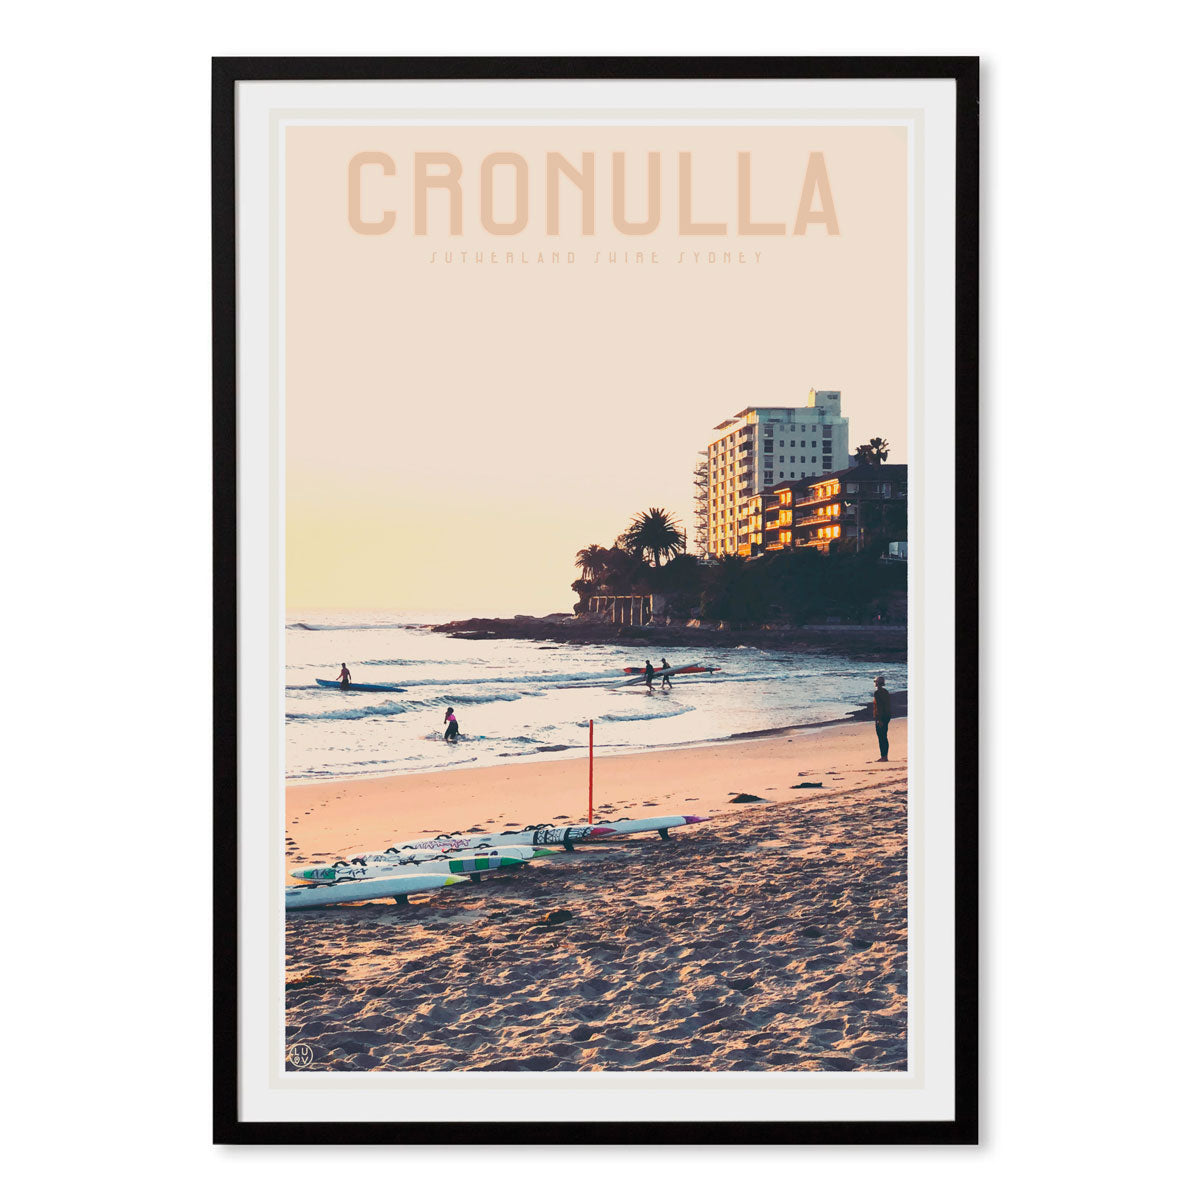 Cronulla black framed print travel style by places we luv